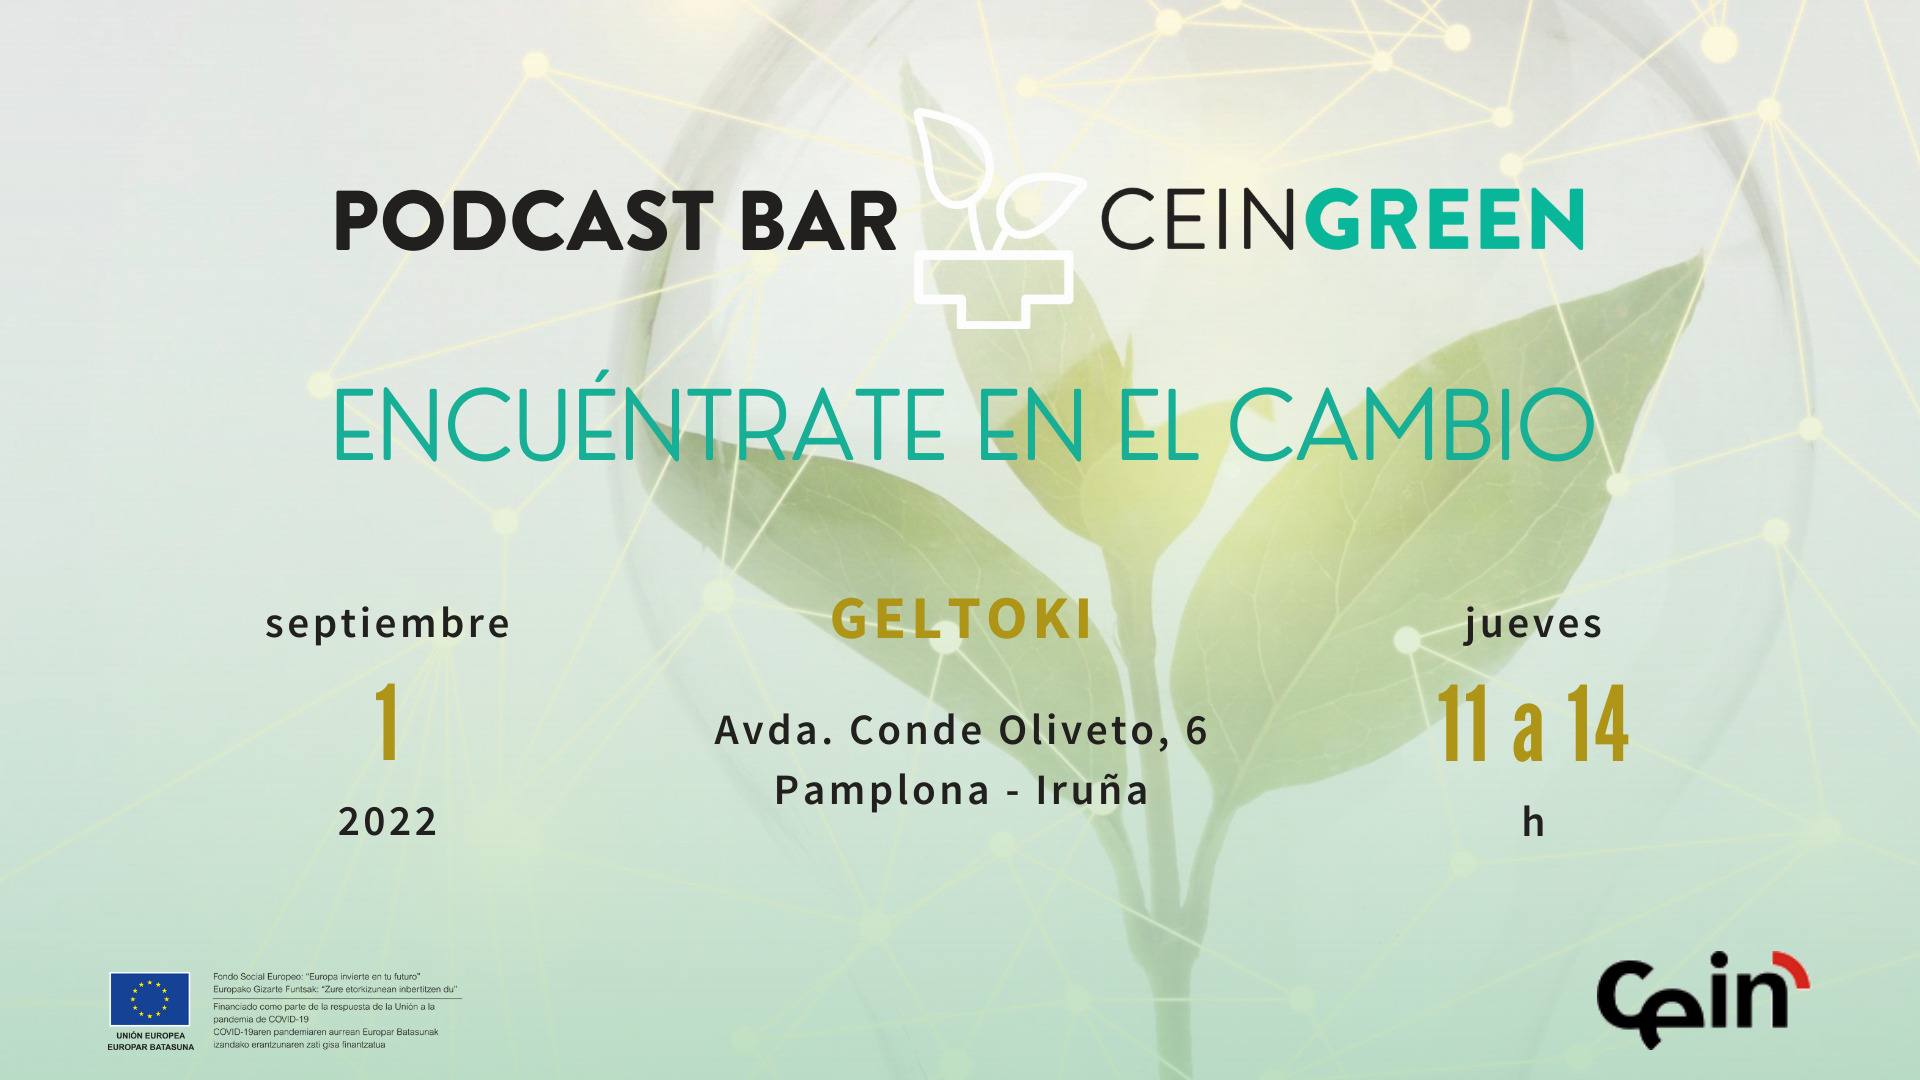 Cein GREEN: podcast bar + networking